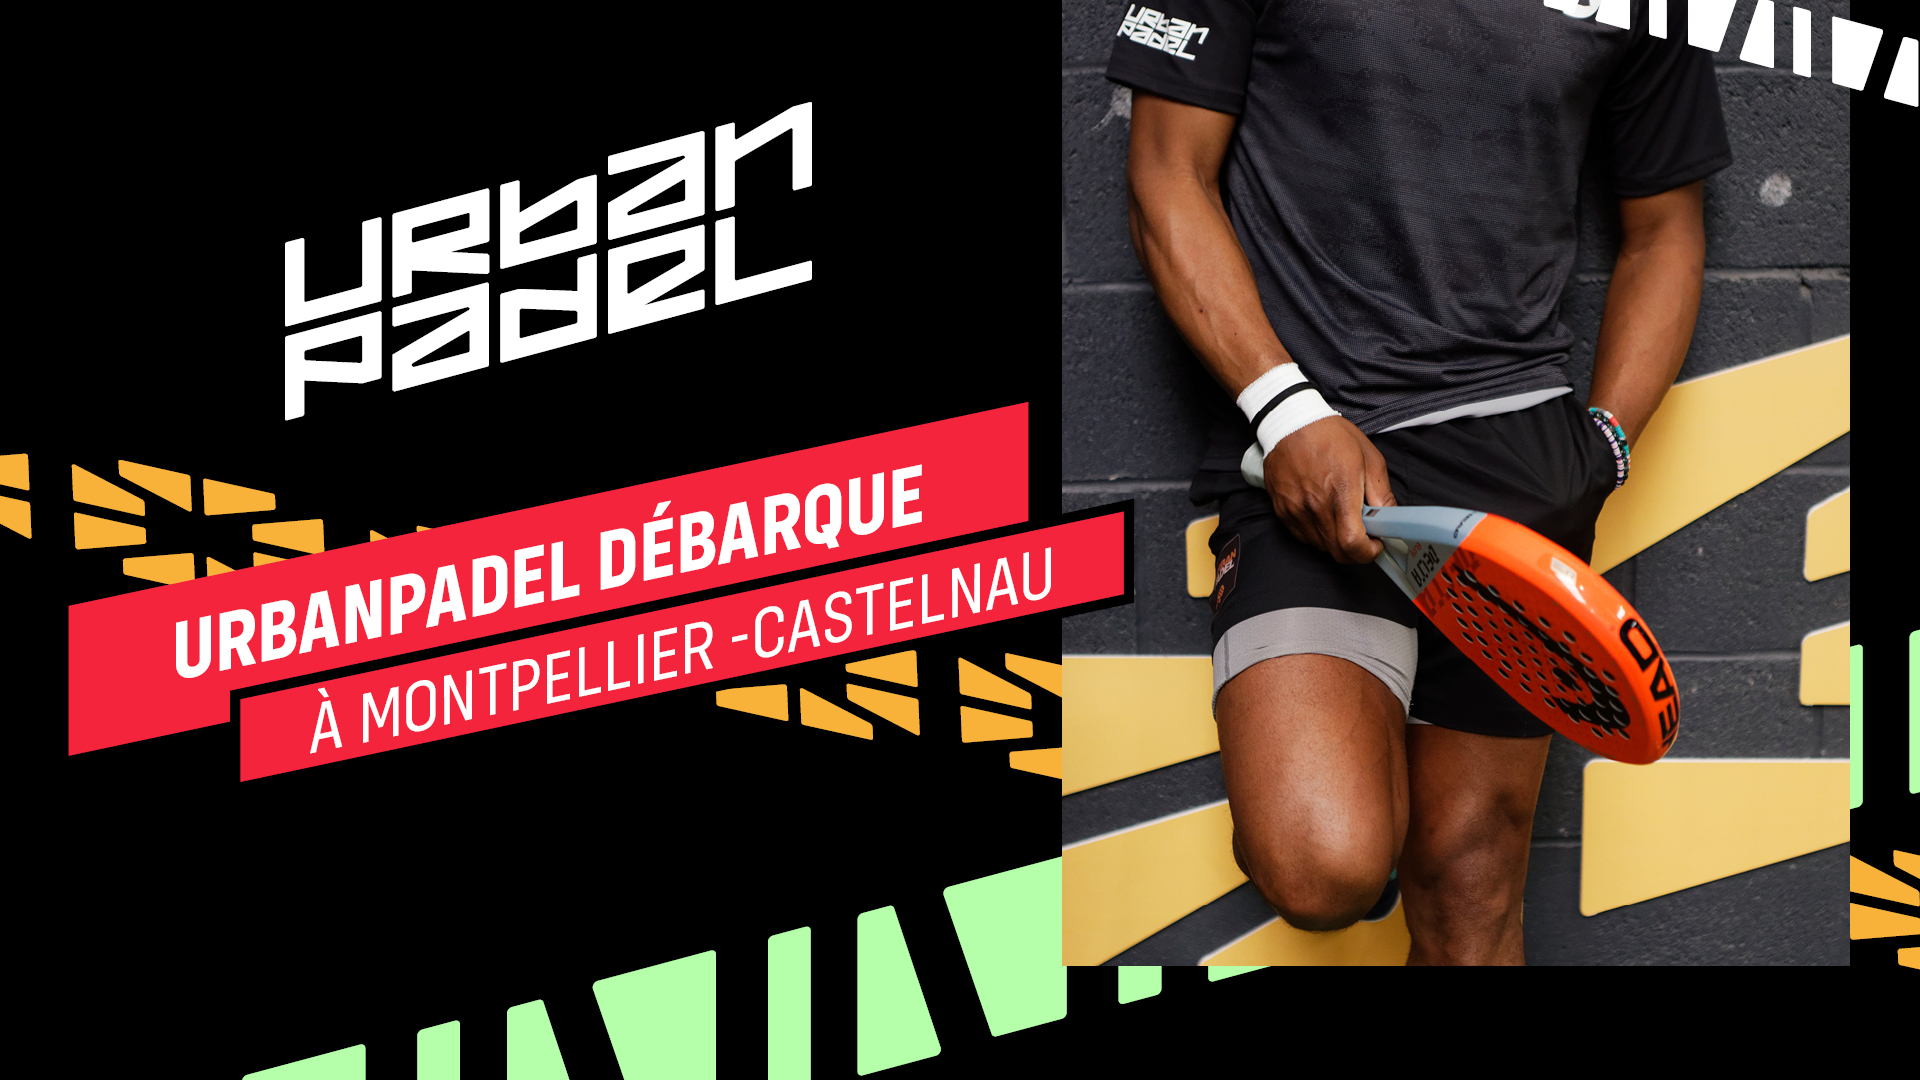 UrbanPadel moved to Montpellier – Castelnau and is looking for a center manager